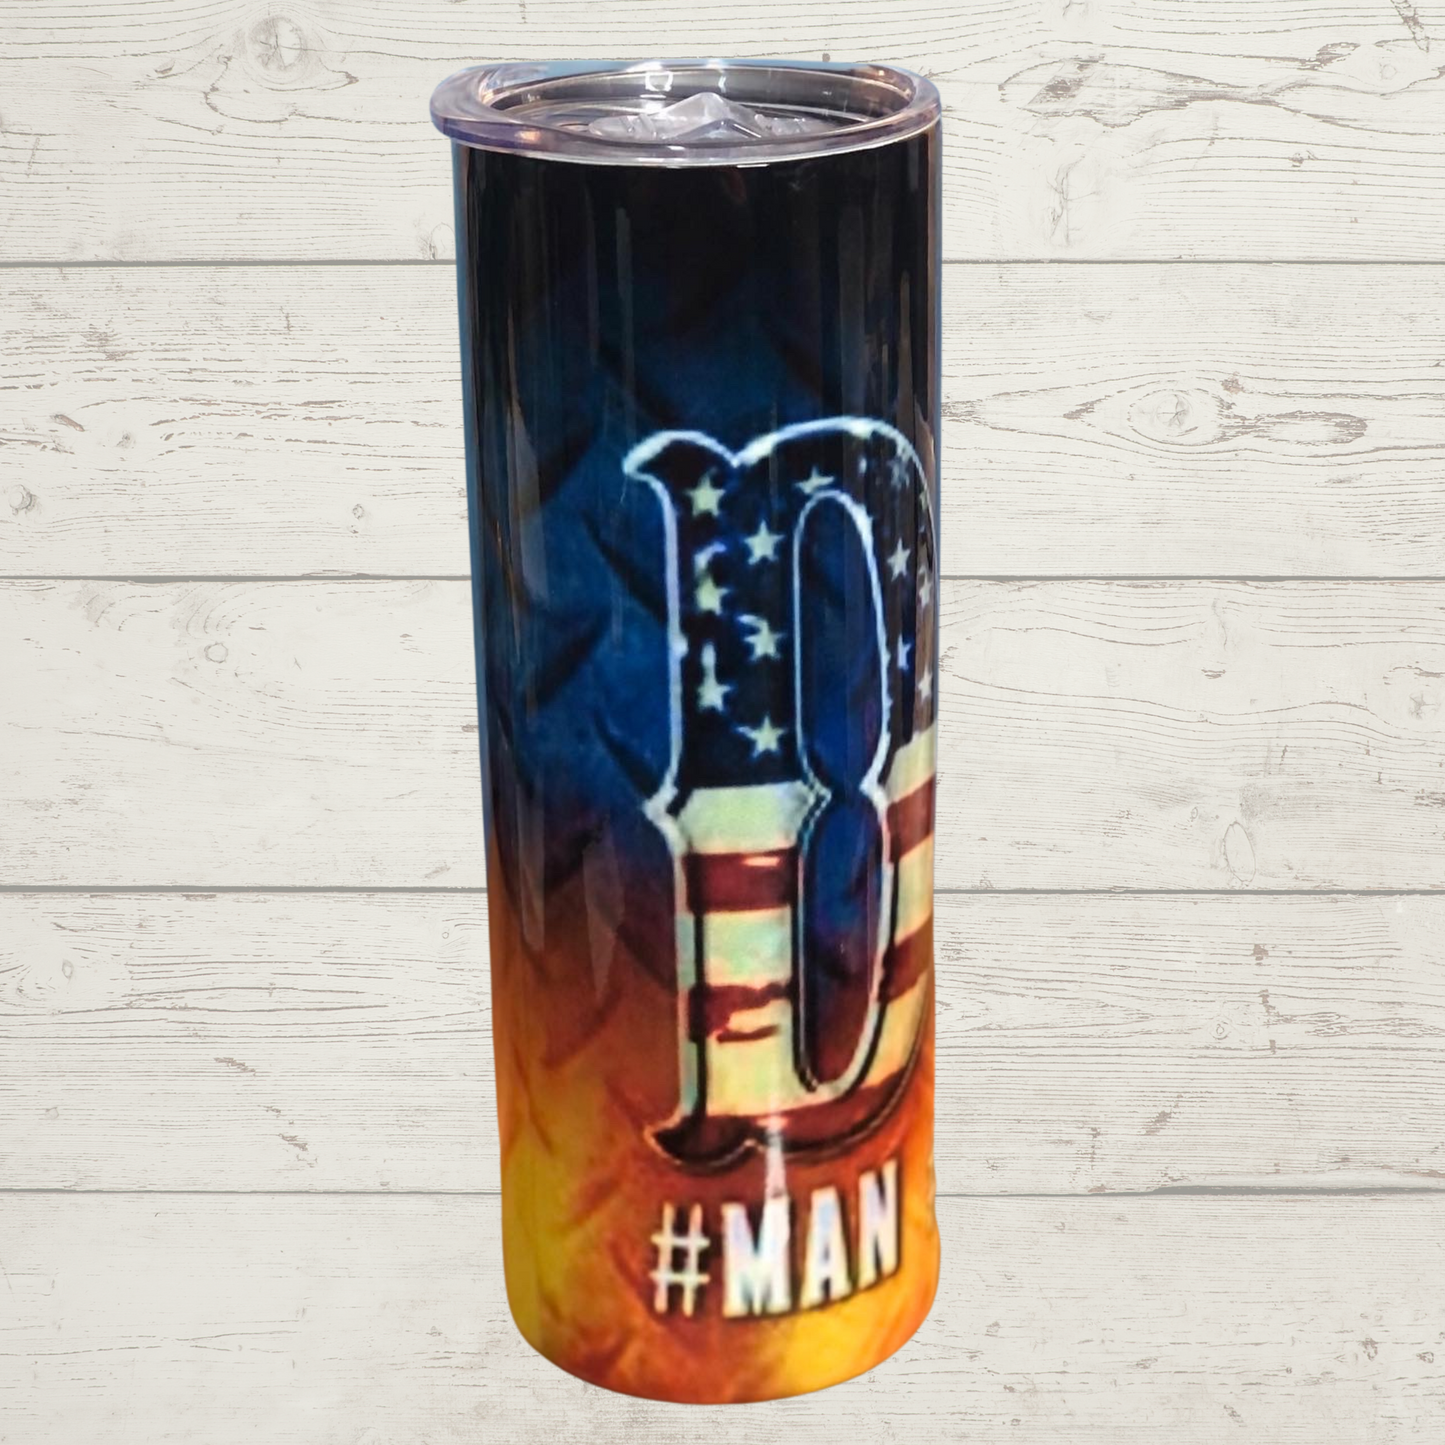 DAD #MANMYTHLEGEND 20 oz Sublimation Skinny Tumbler Black Blue and Orange Background with American Flag Red White and Blue D A D # Man Myth Legend High Defintion Quality Images on Quality Tumblers